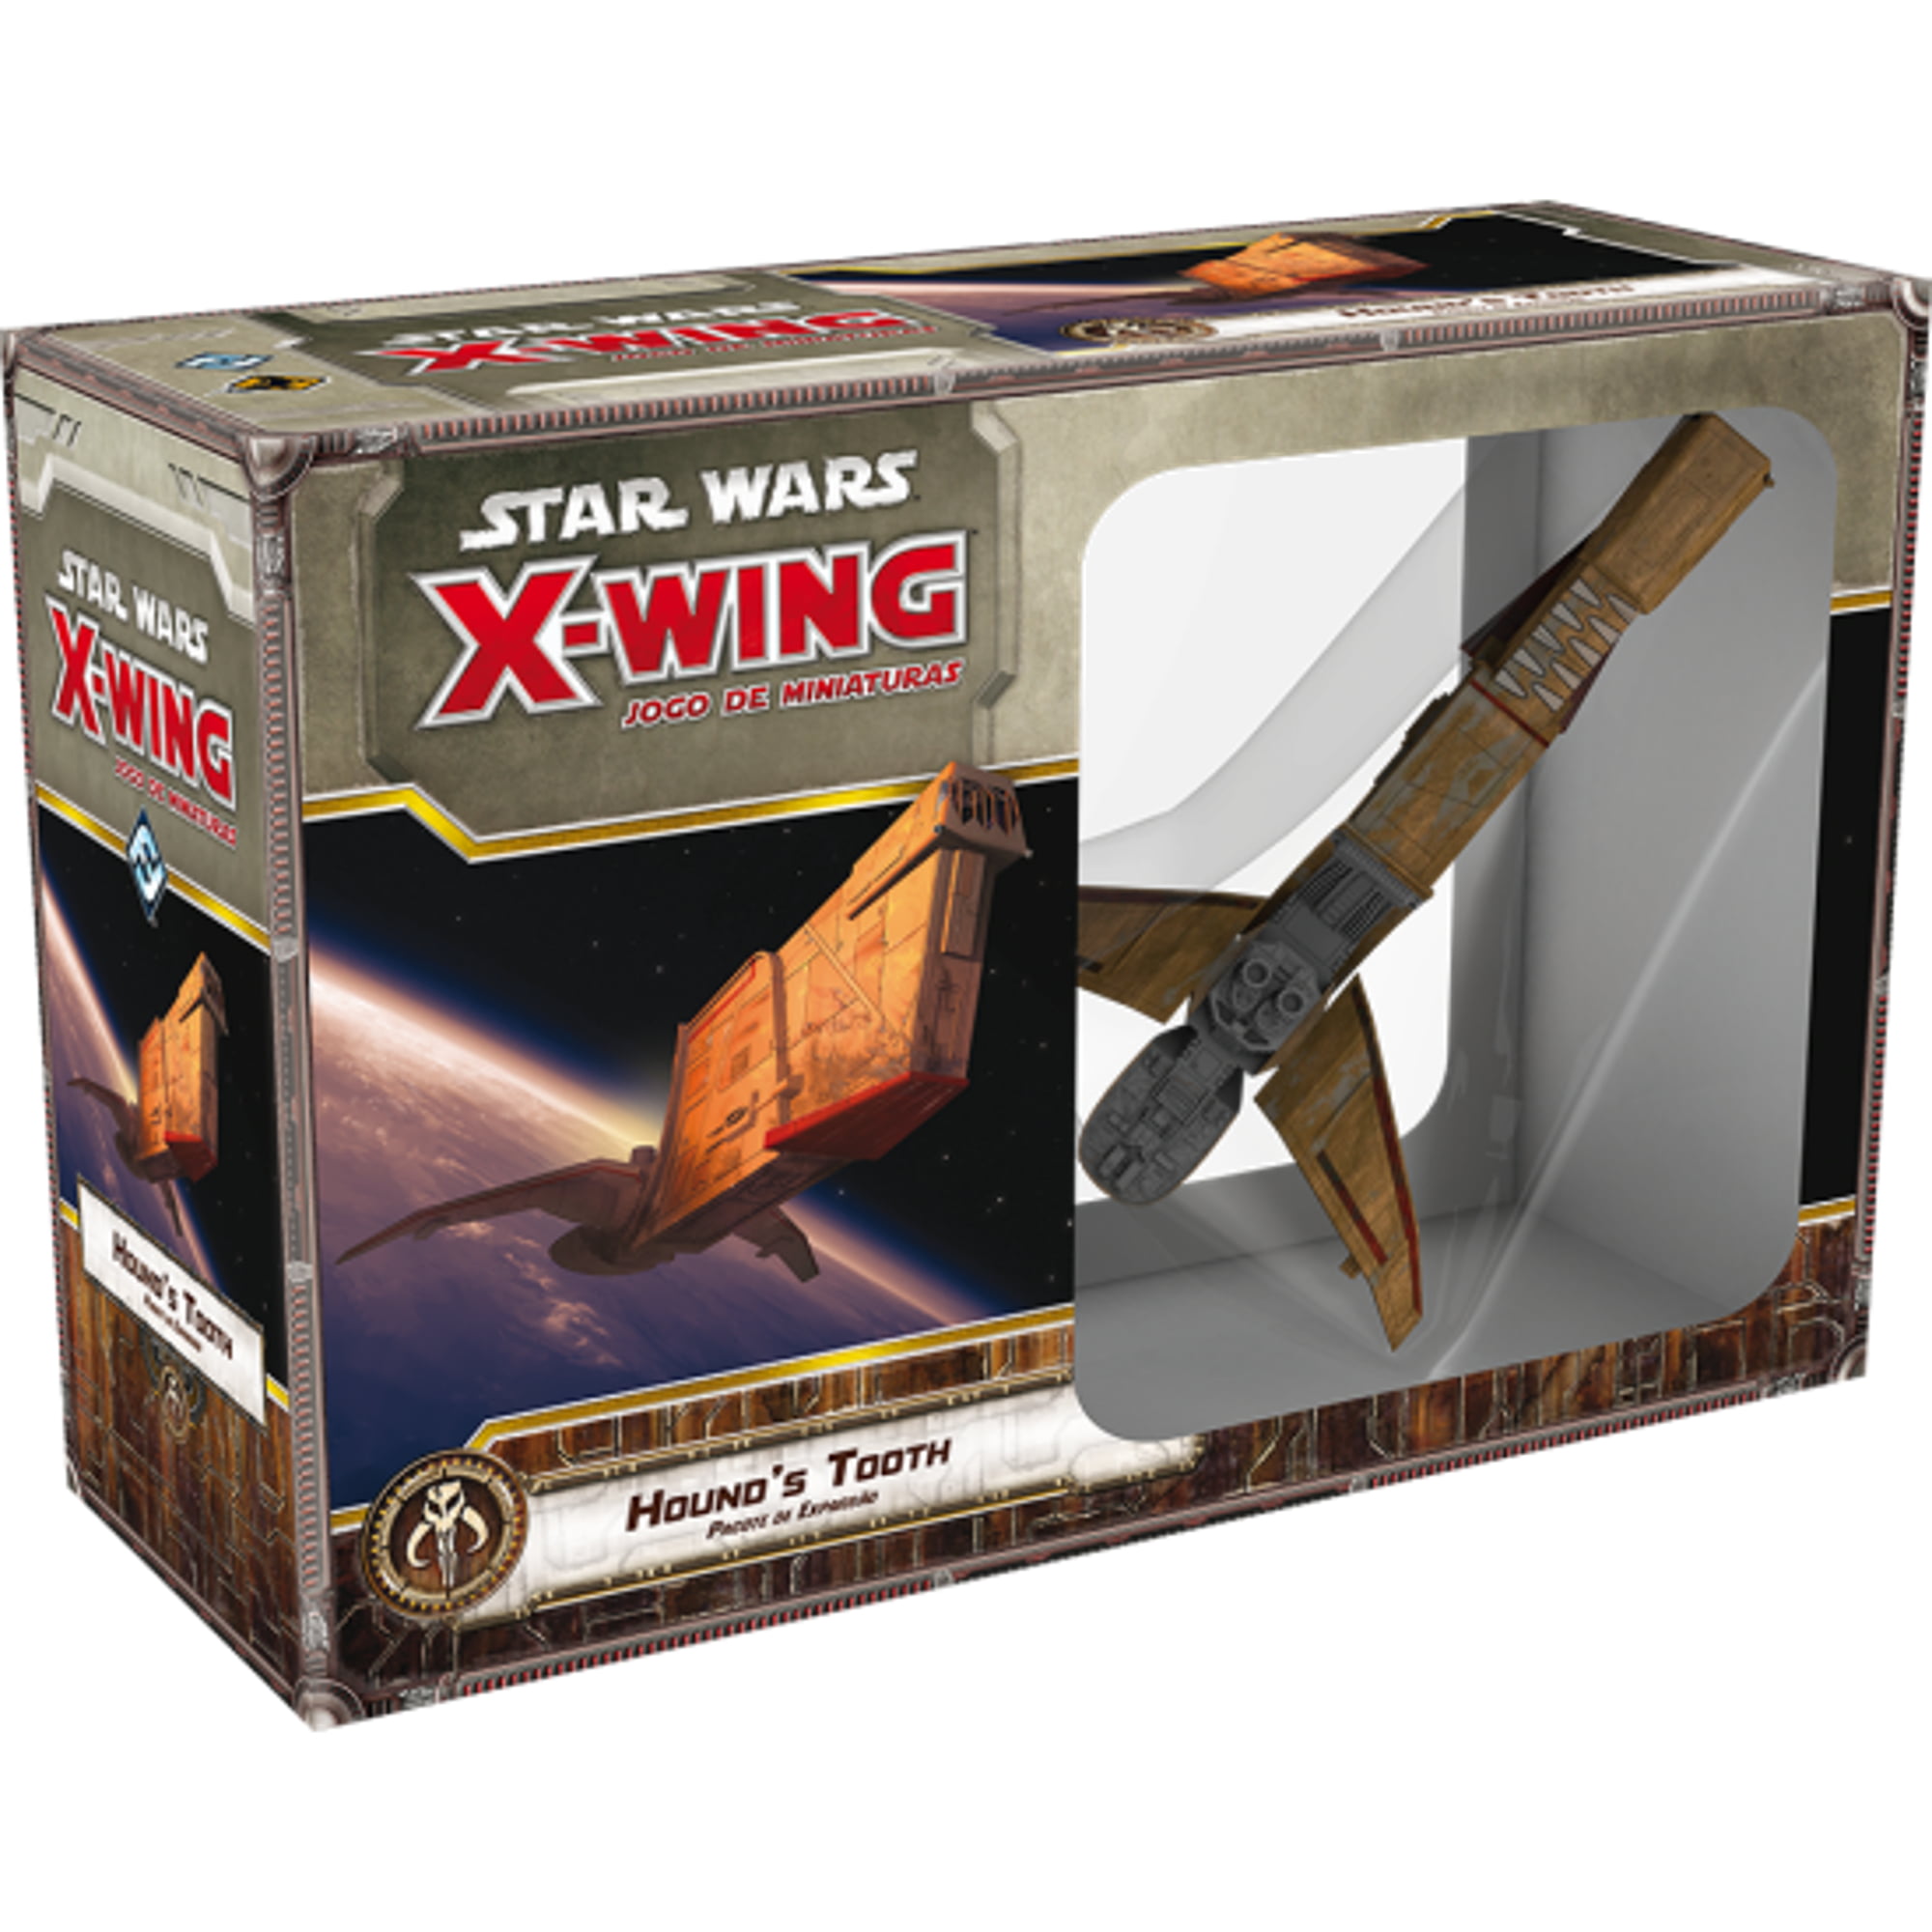 Star Wars X-Wing - Hounds Tooth